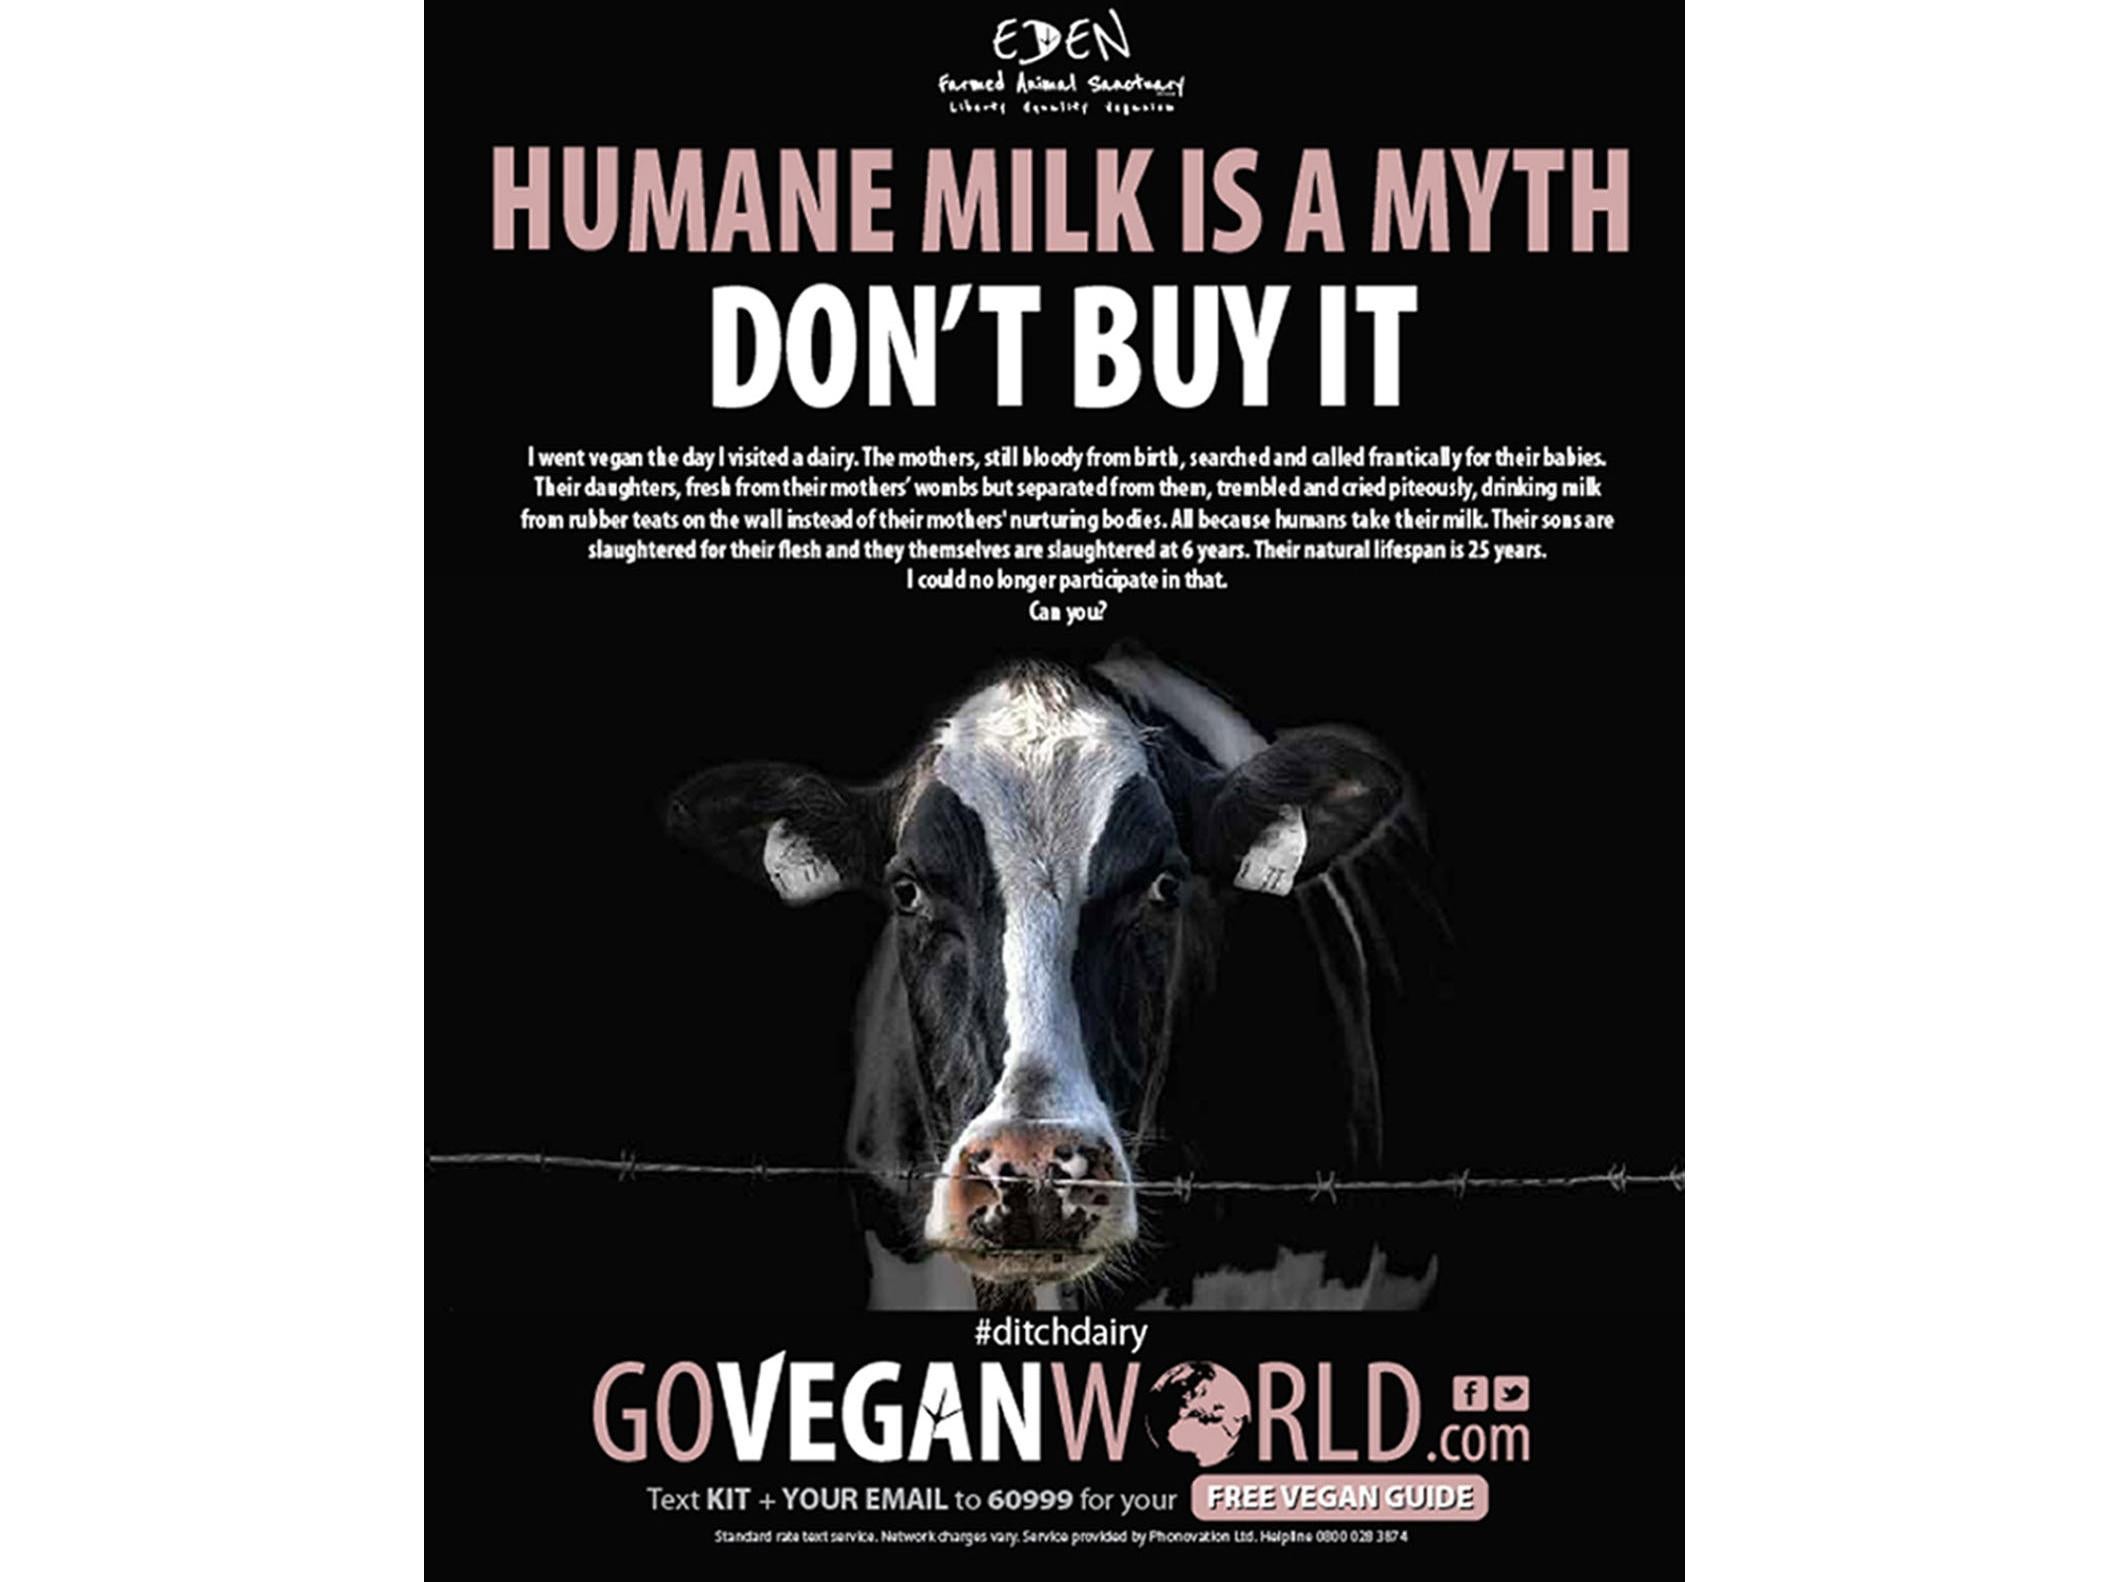 The offending advert for Go Vegan World, which has been cleared by the regulator following complaints from members of the dairy industry that it was inaccurate and misleading